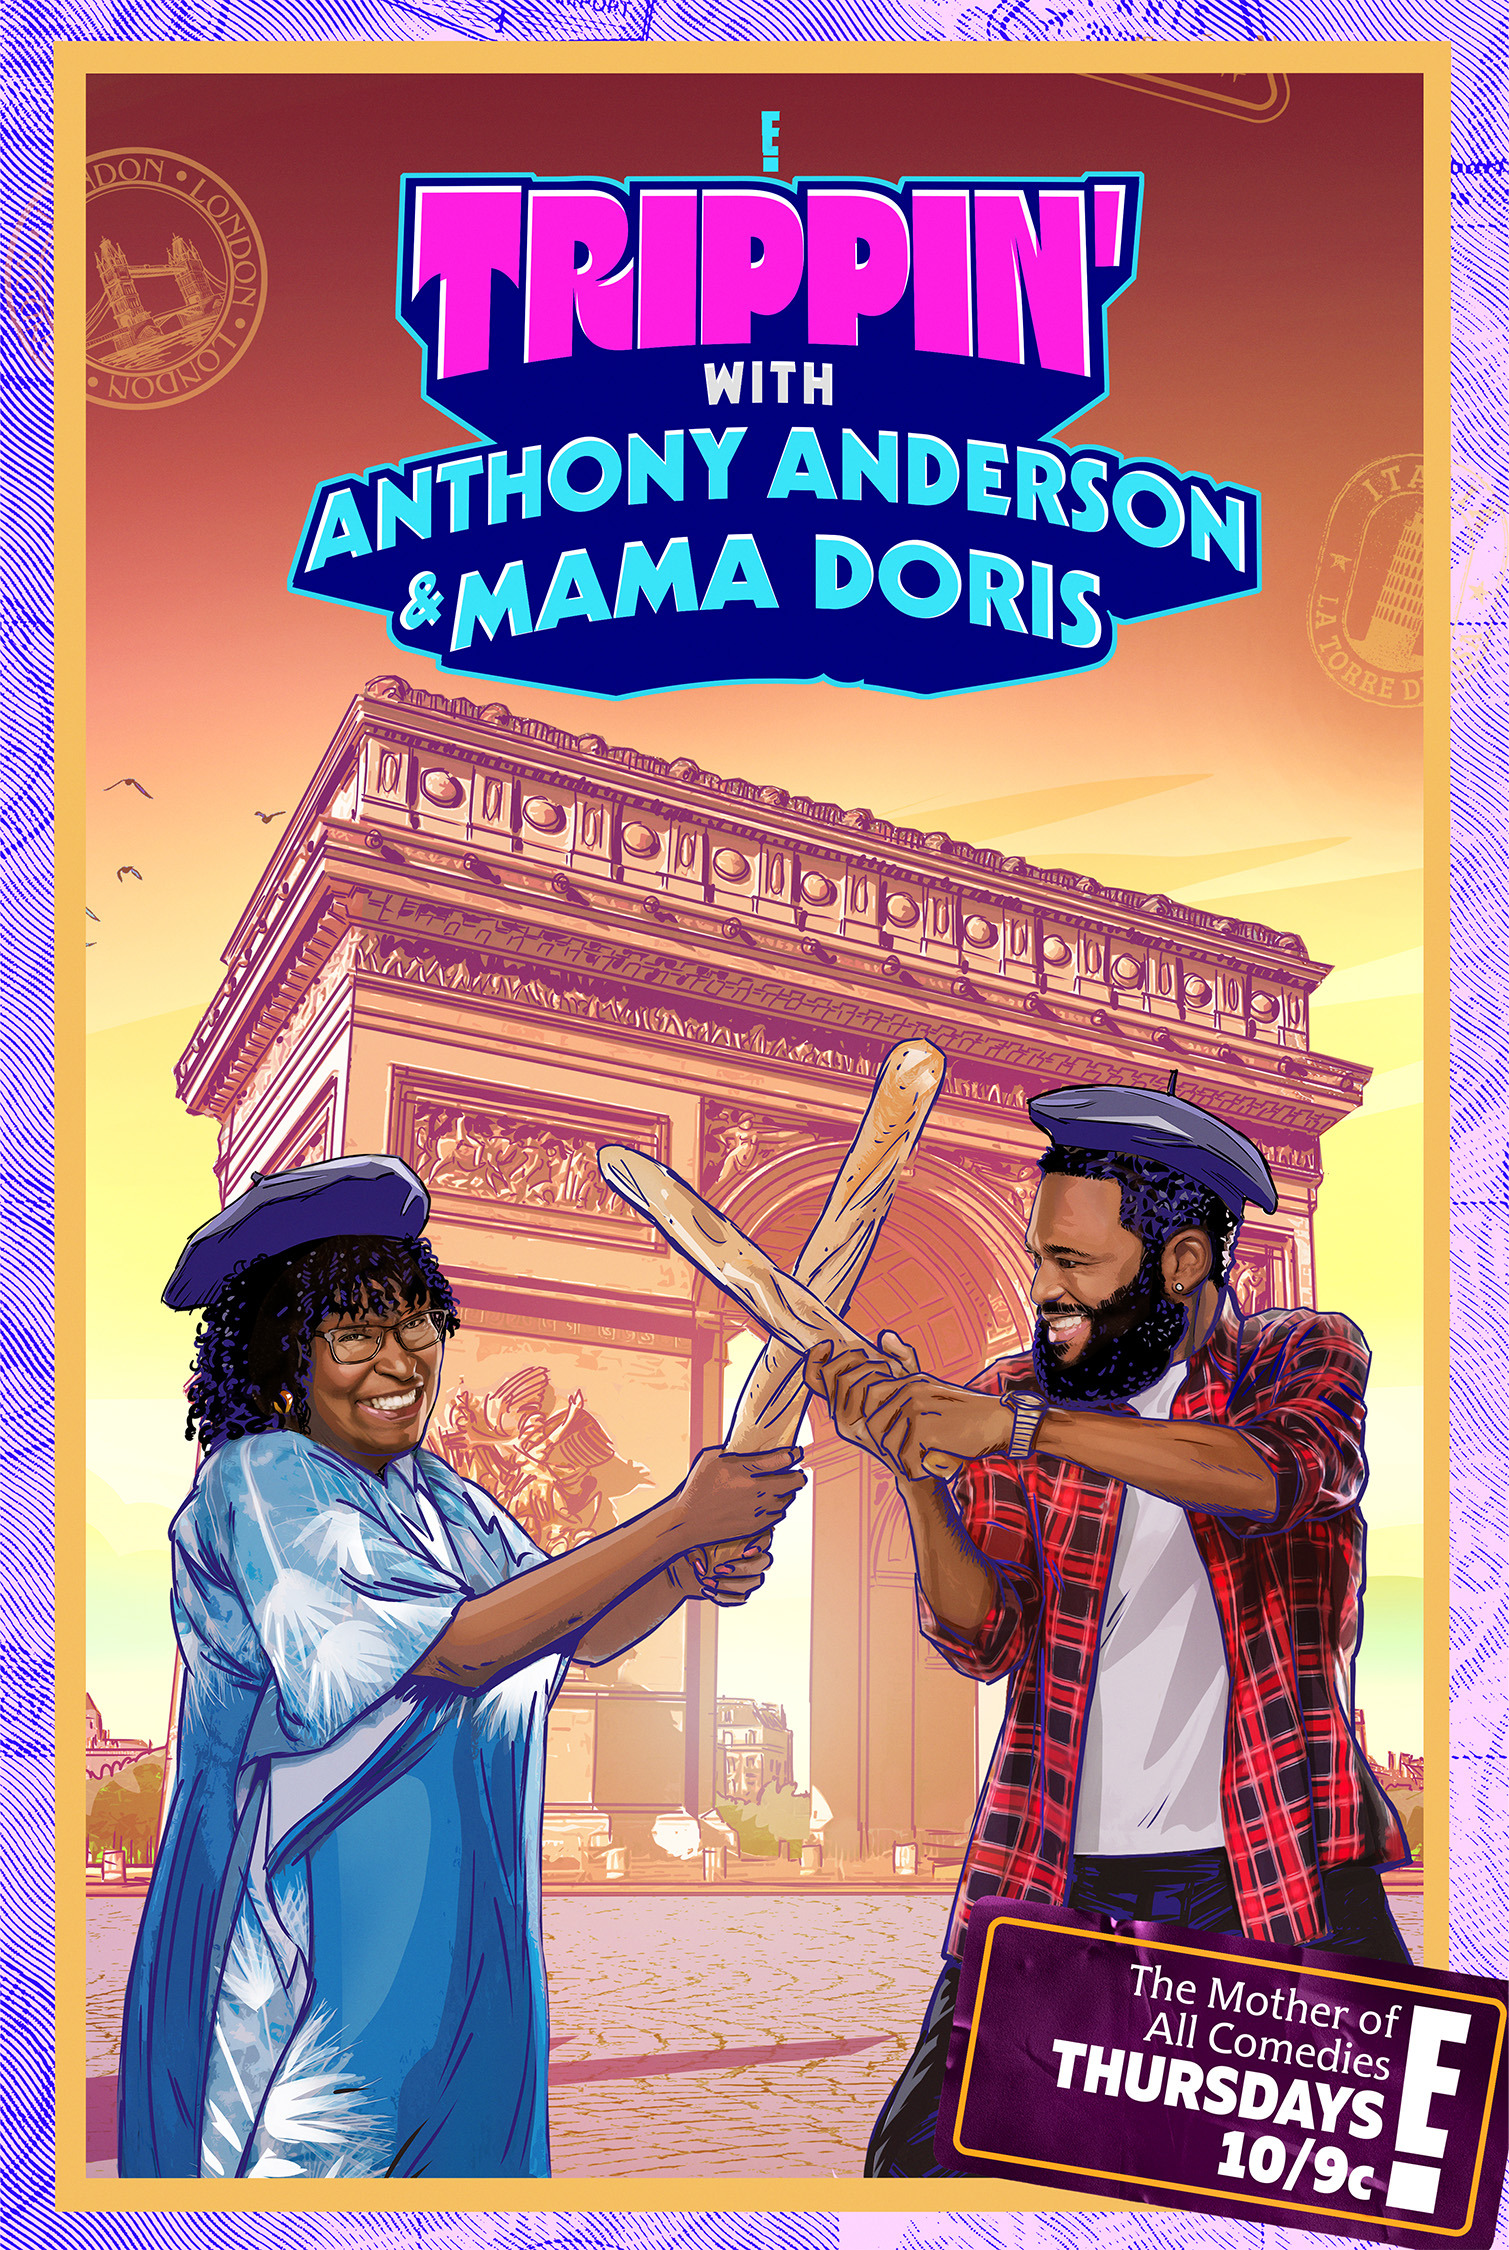 Mega Sized TV Poster Image for Trippin' with Anthony Anderson and Mama Doris (#3 of 5)